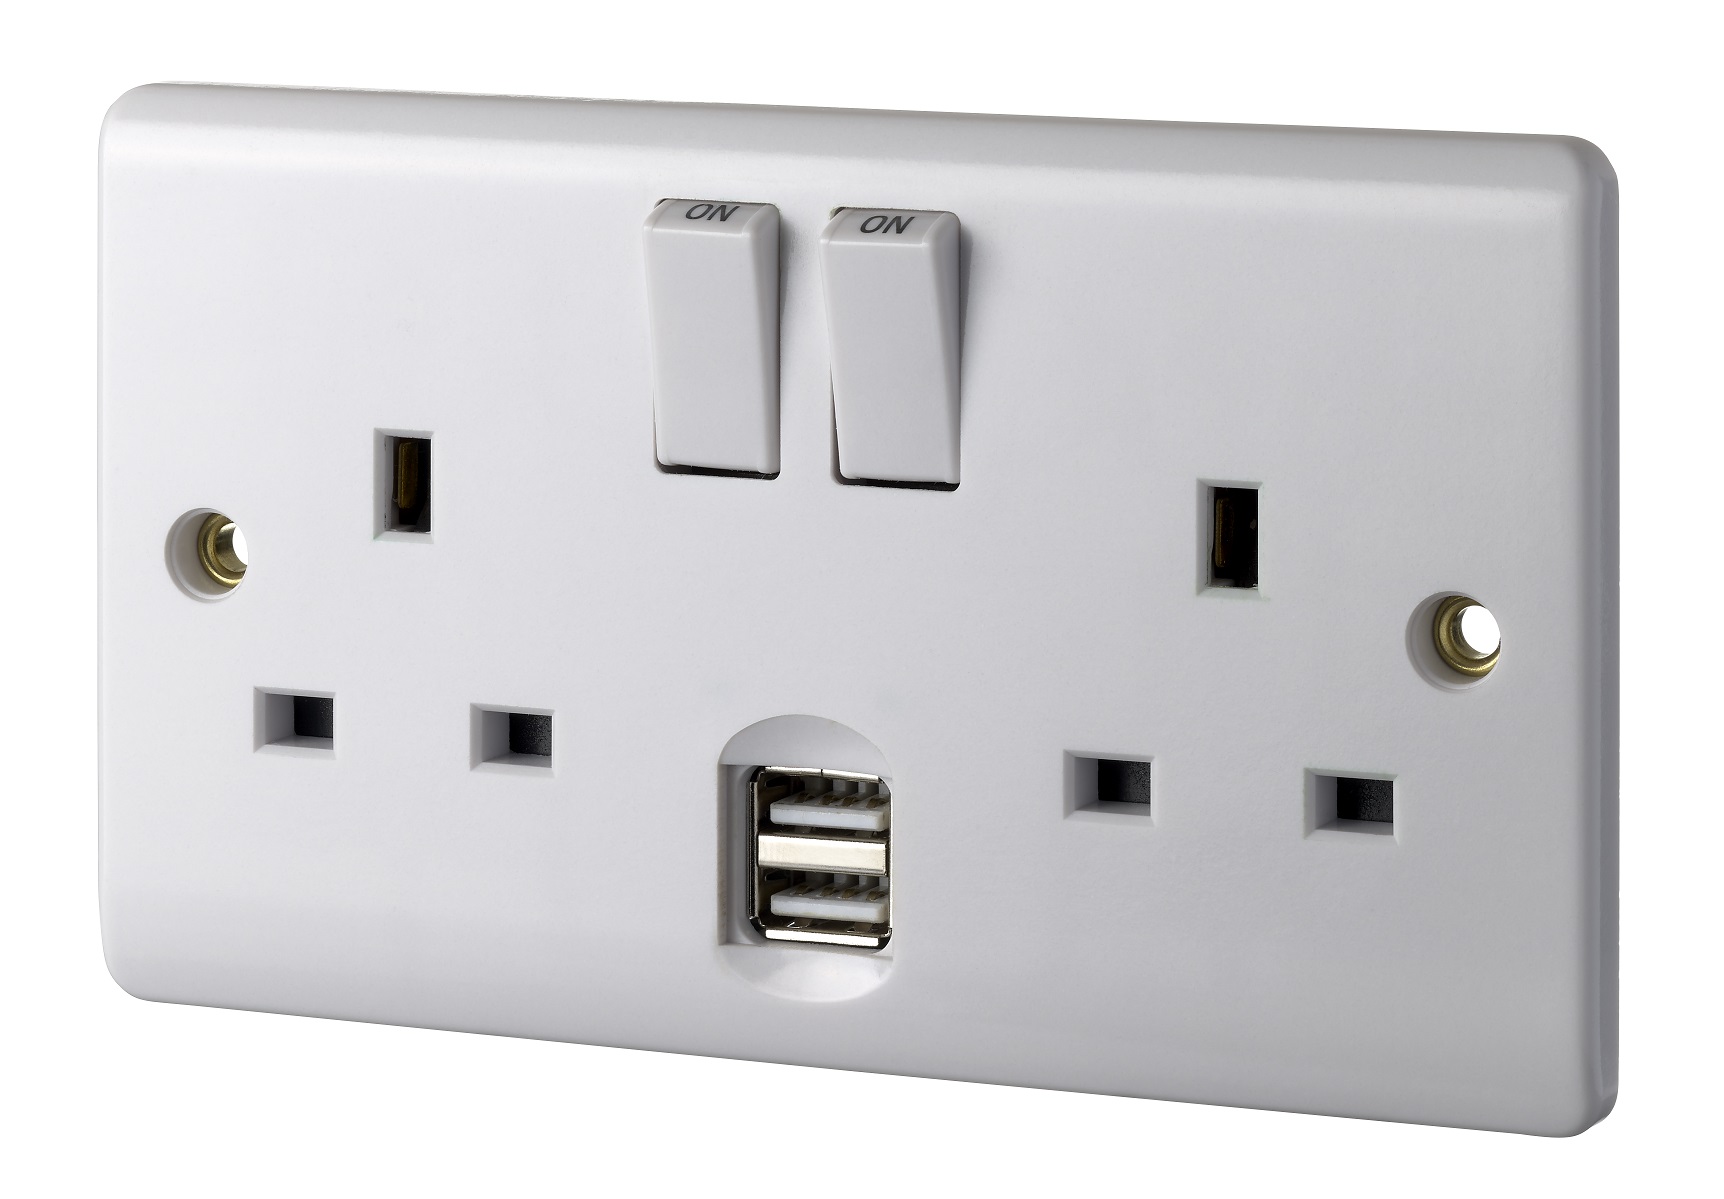 Double Wall Socket with USB - ENER029 | Energy Saving Products ...